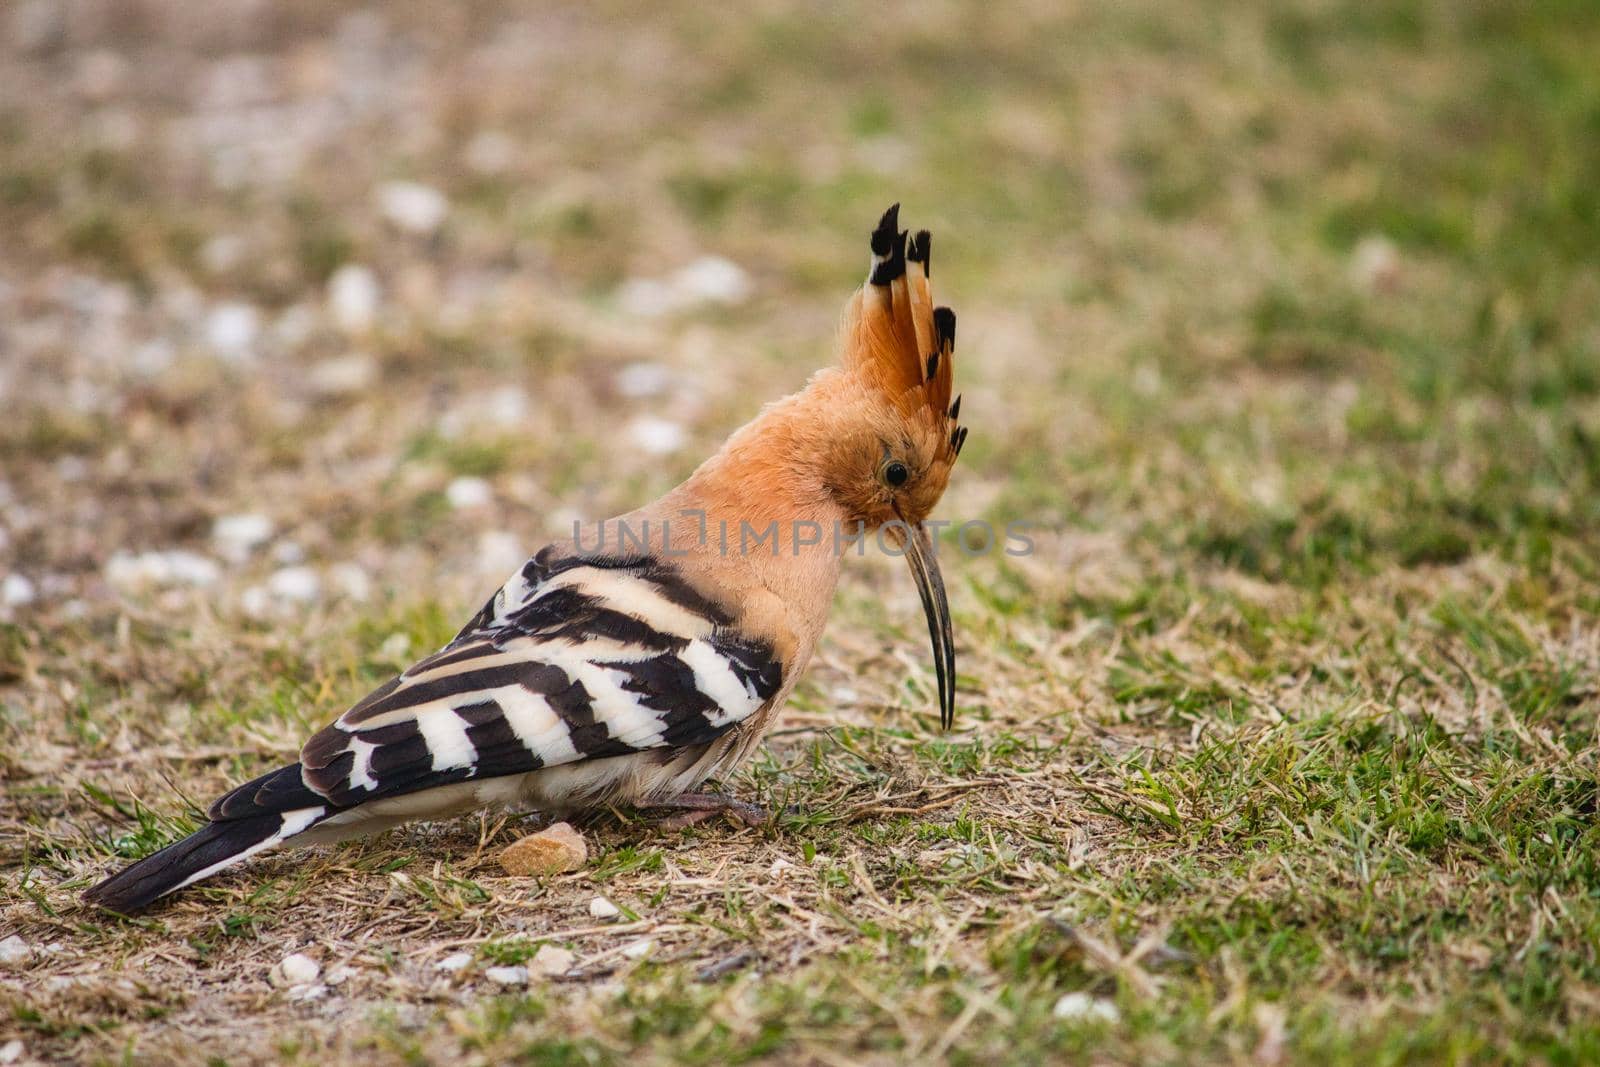 Common Eurasian Hoopoe (Upupa epops) on the grassy ground by tennesseewitney